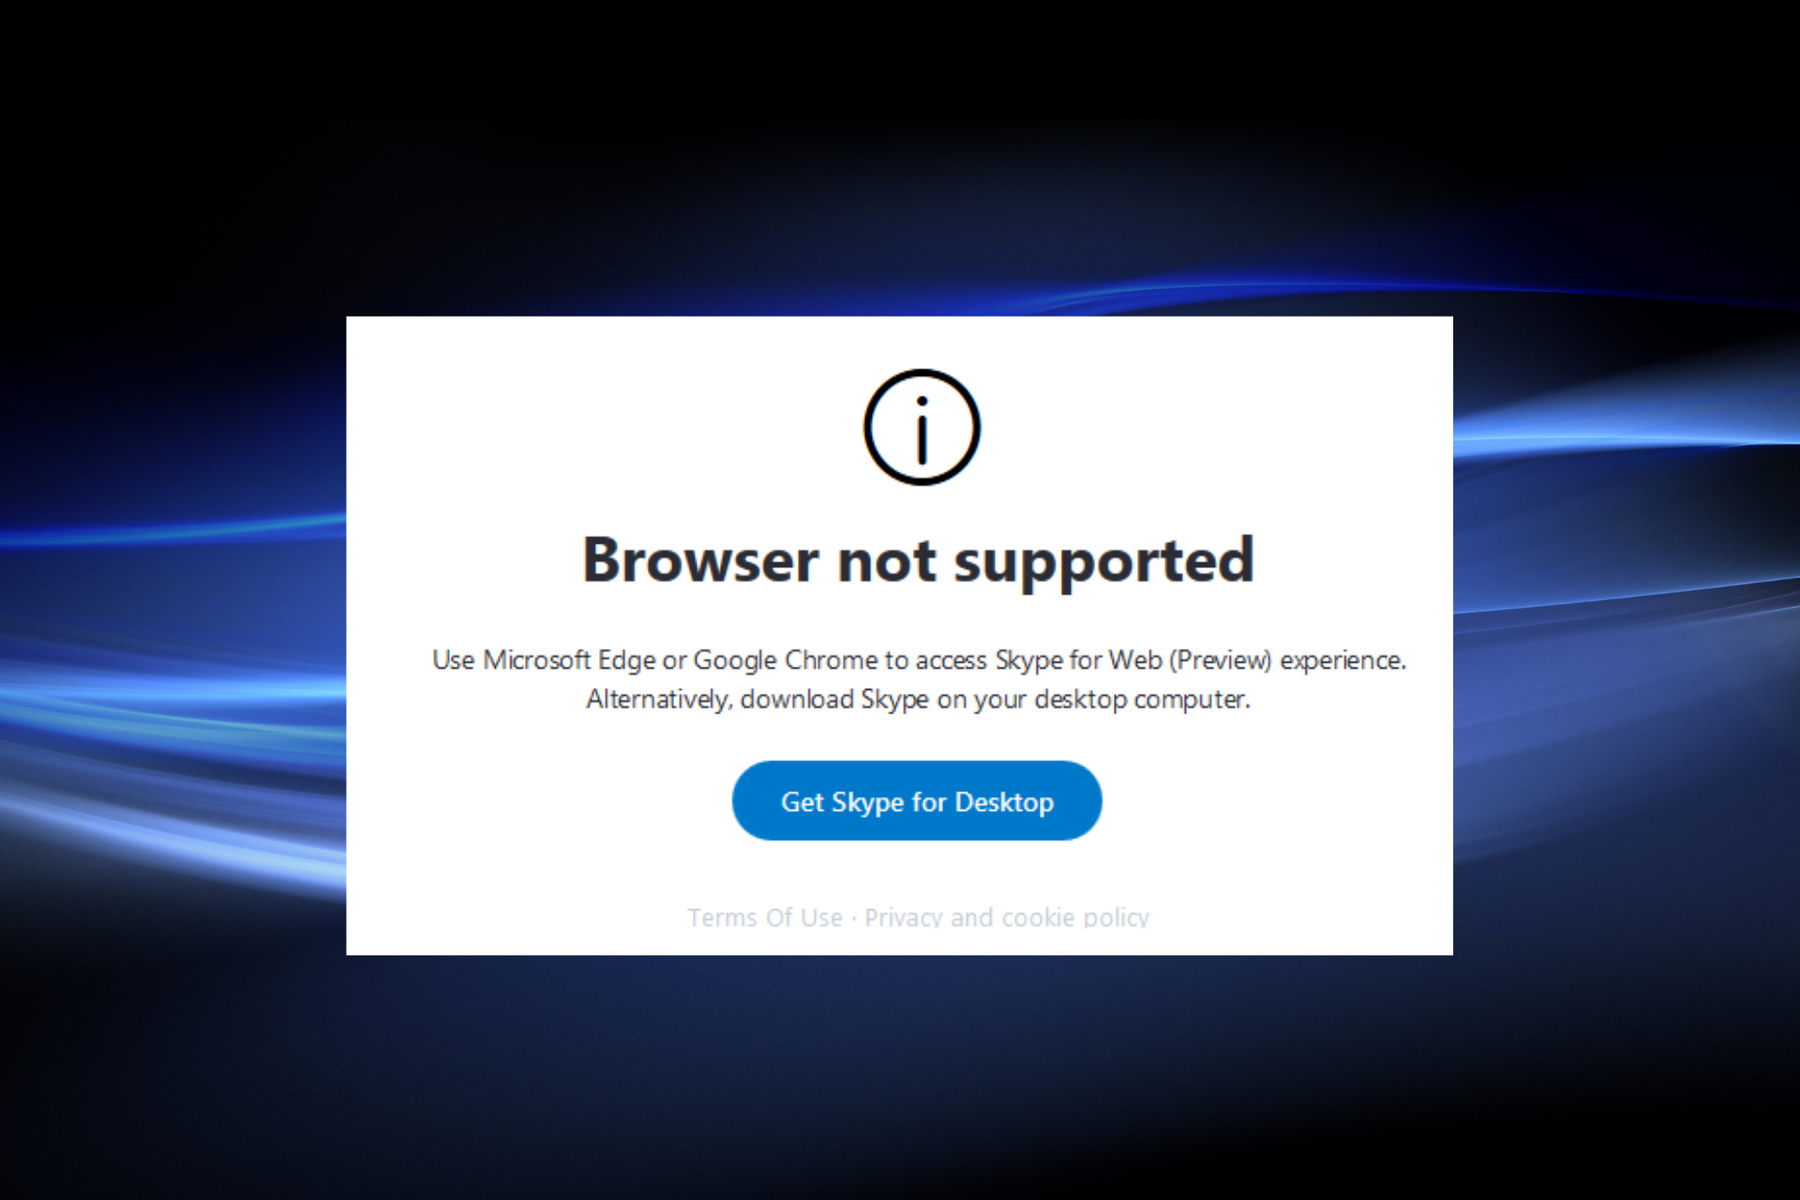 What Does “Browser Not Supported” Mean